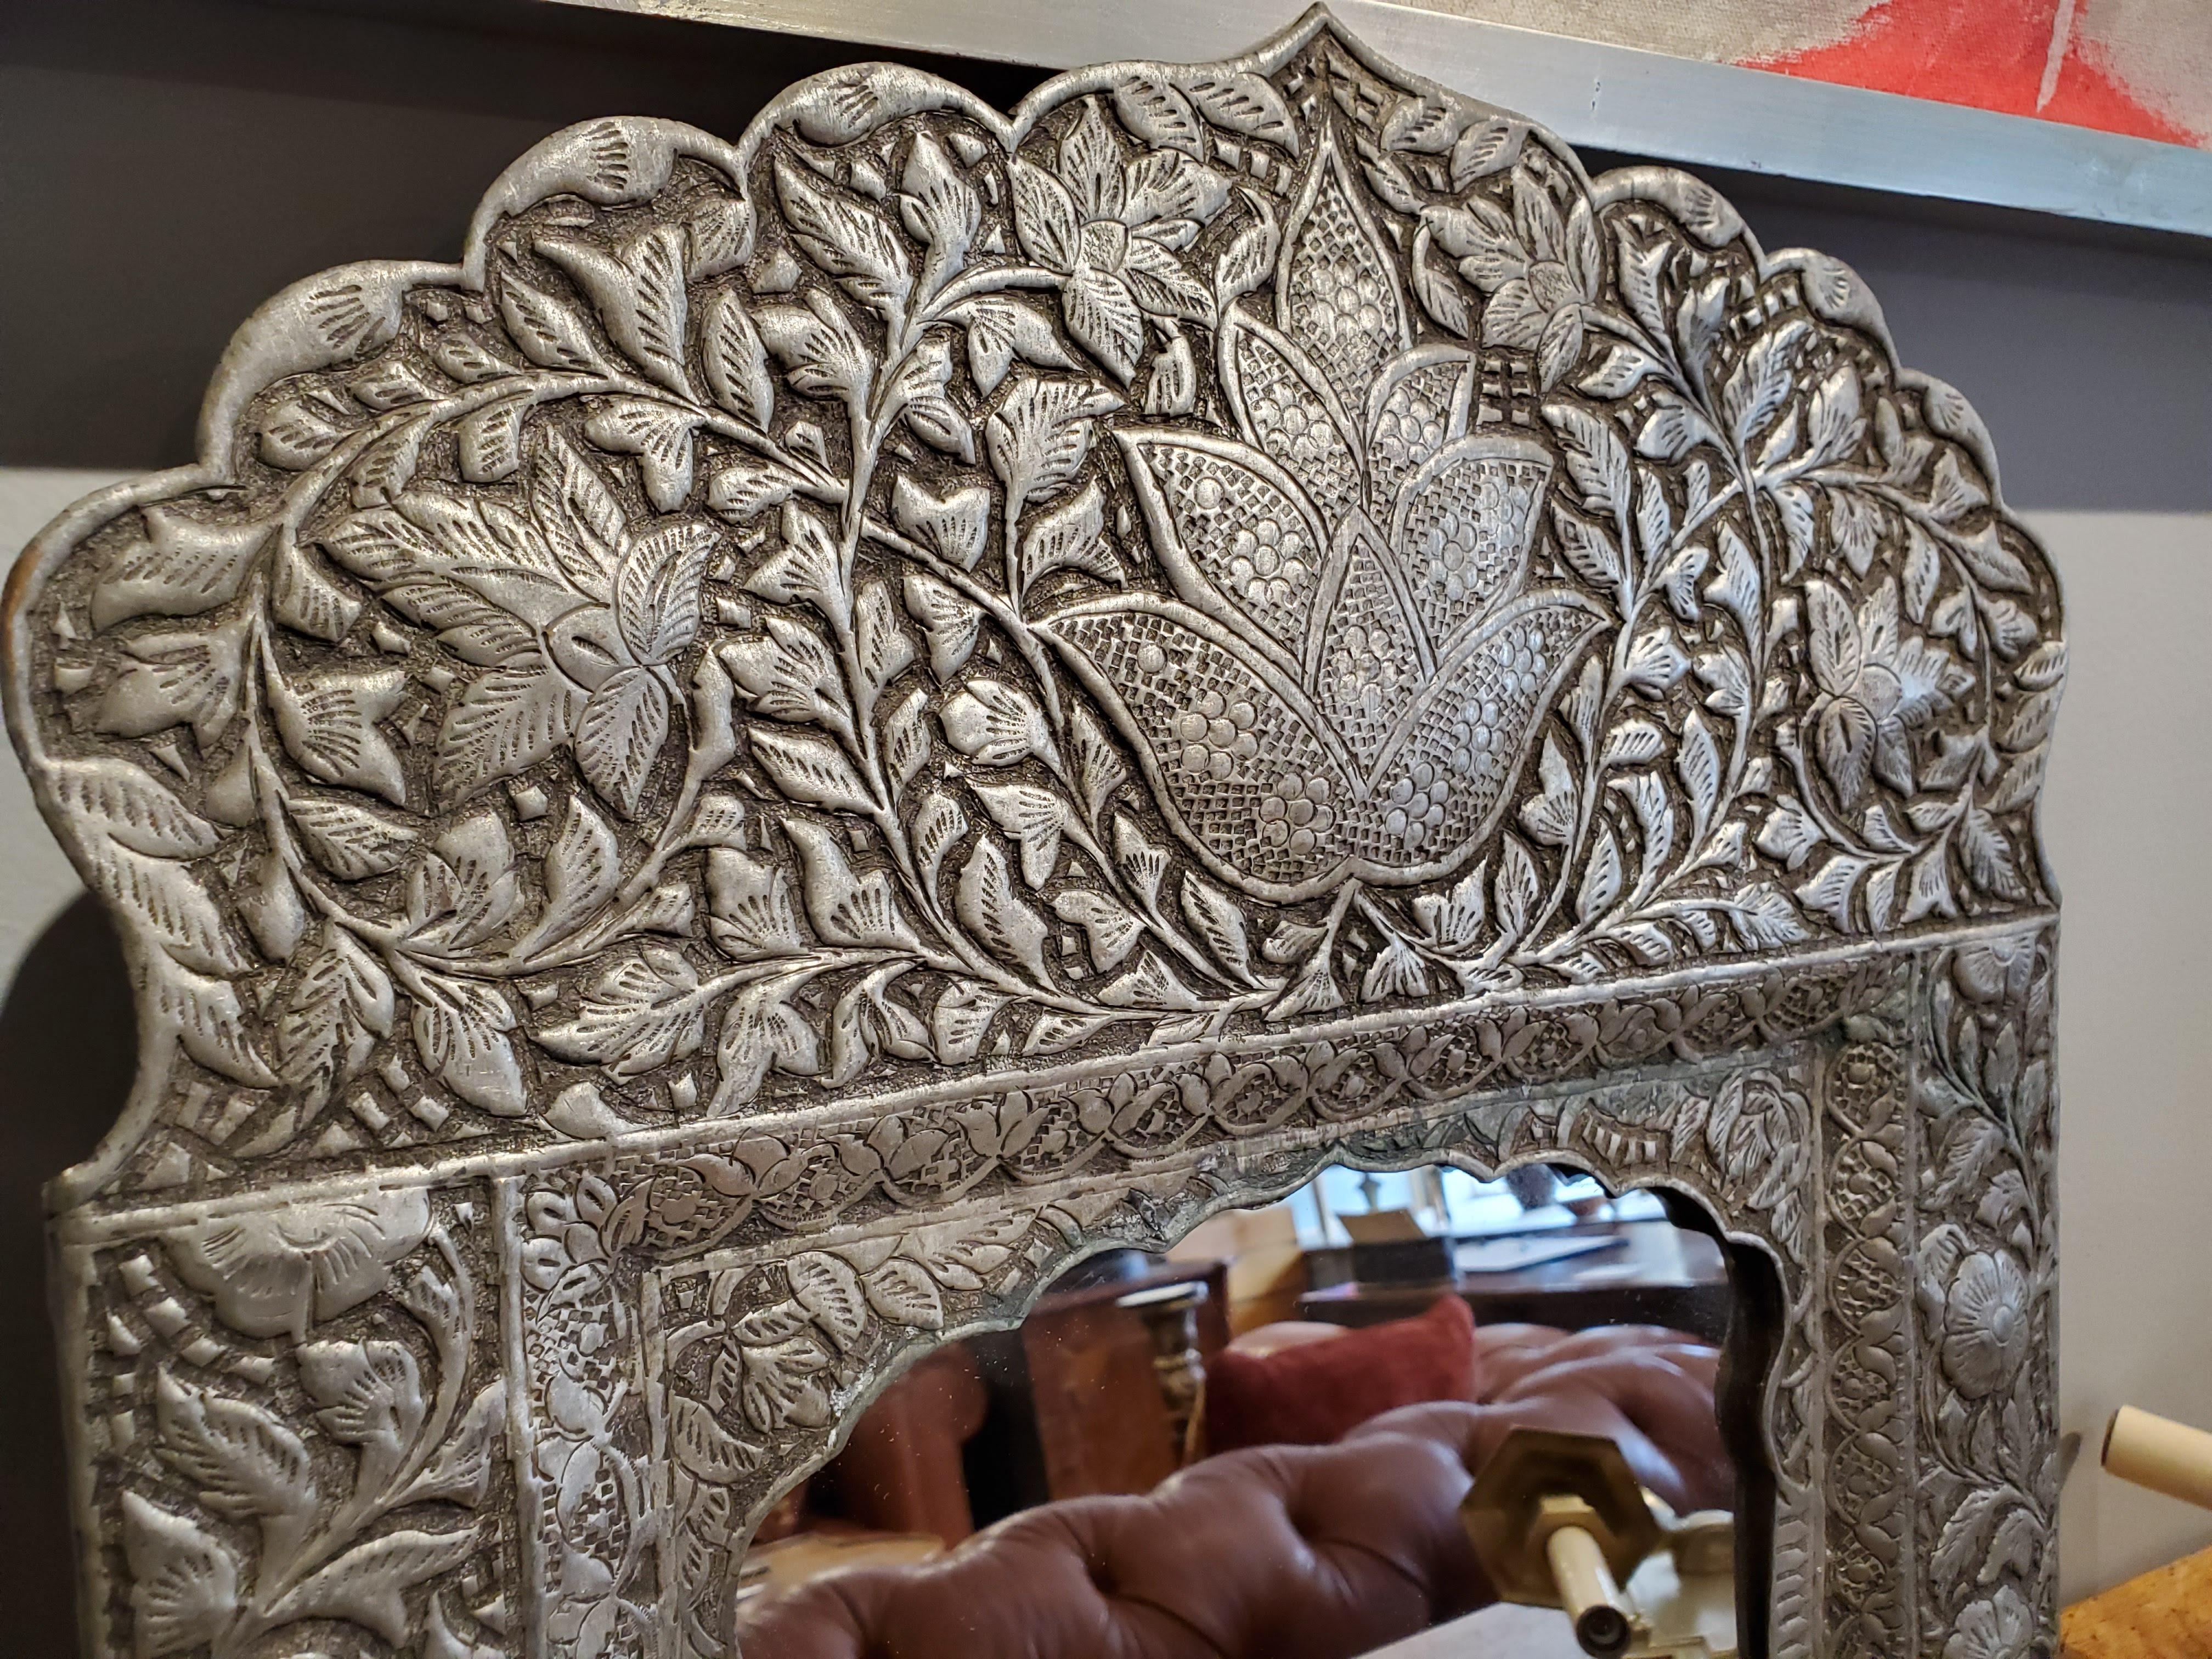 Beautiful mirror for Bohemian inspired design. Intricately hammered and faceted designs with shaped crests over Moorish arches. Great for hallways and small spaces.
Made in India.
Measures: 19